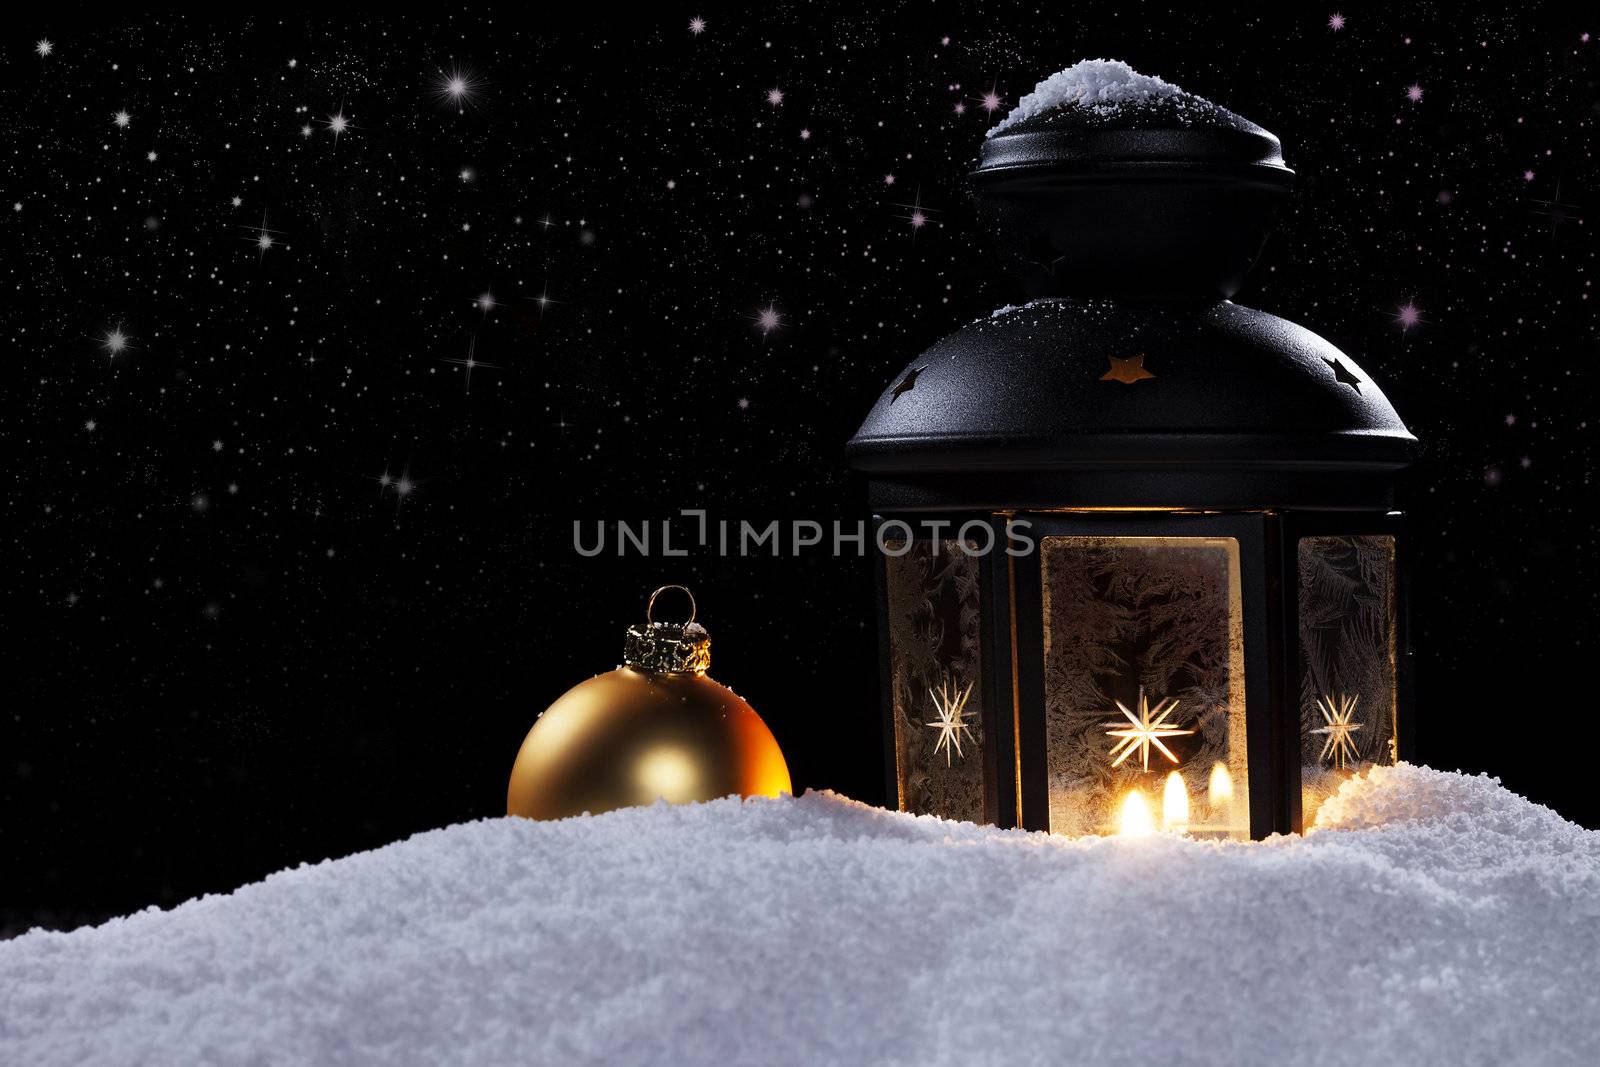 frozen lantern at night with stars and a golden christmas ball in snow